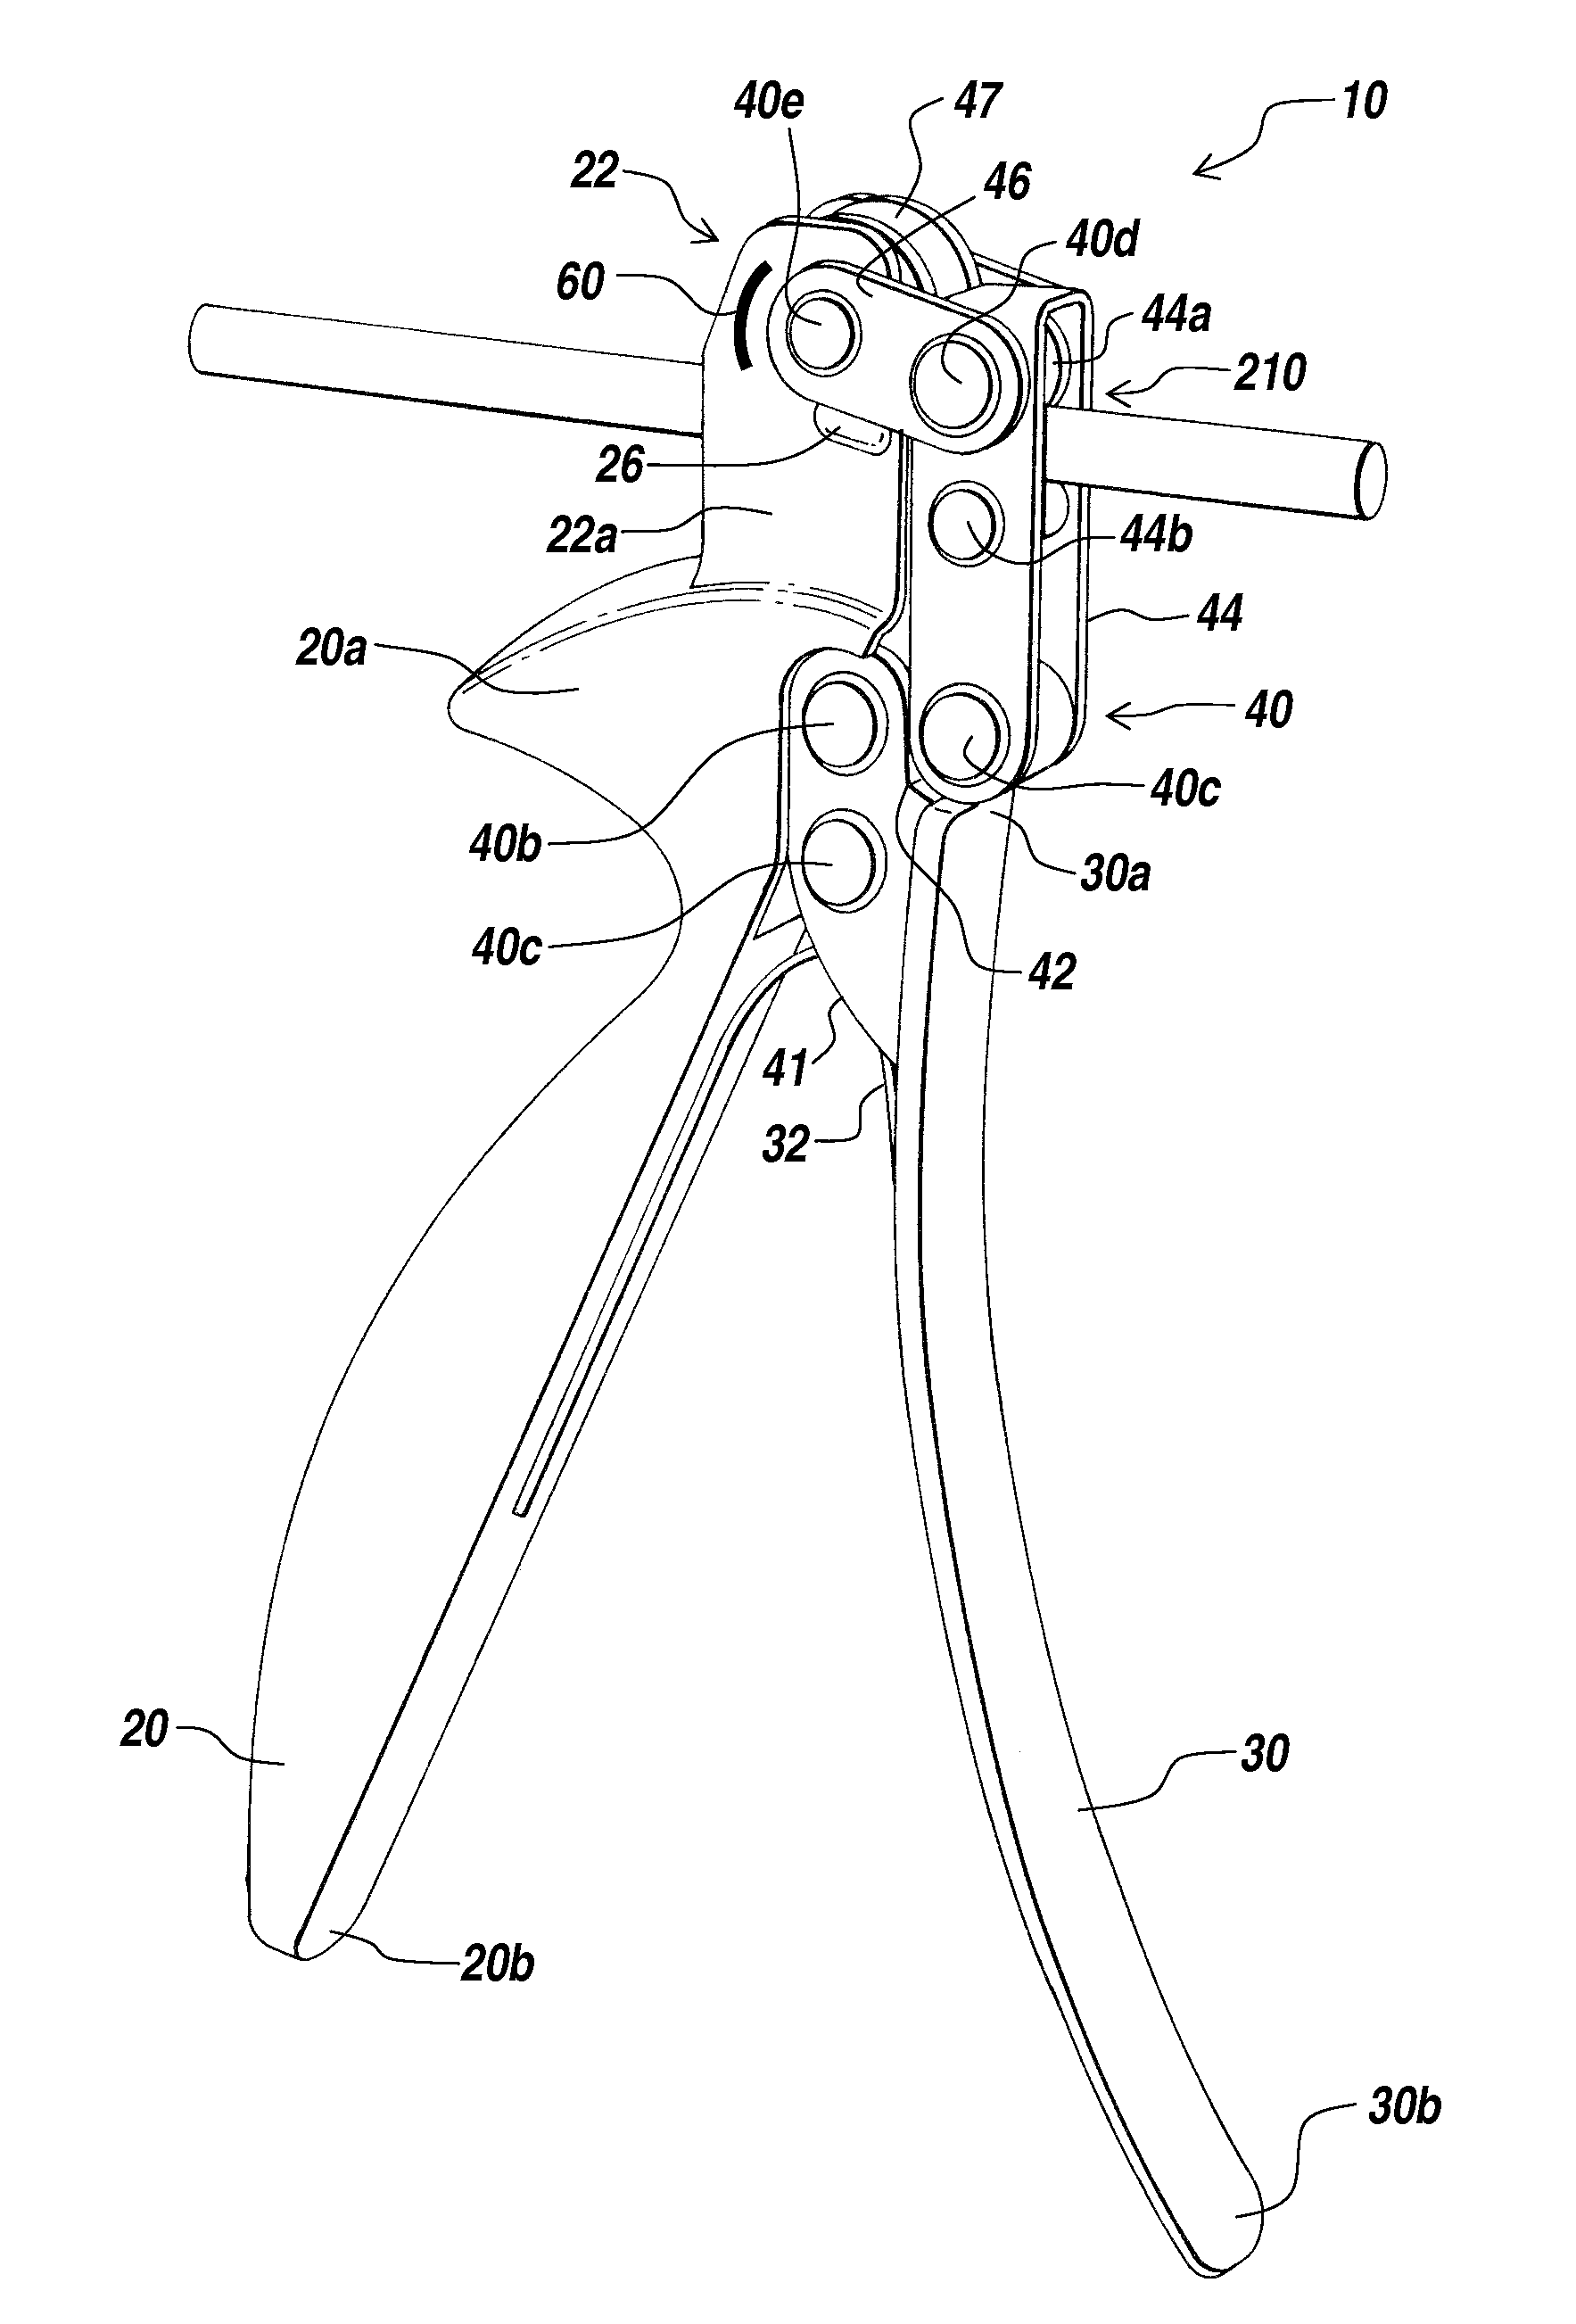 Instrument for bending spinal rods used in a spinal fixation system